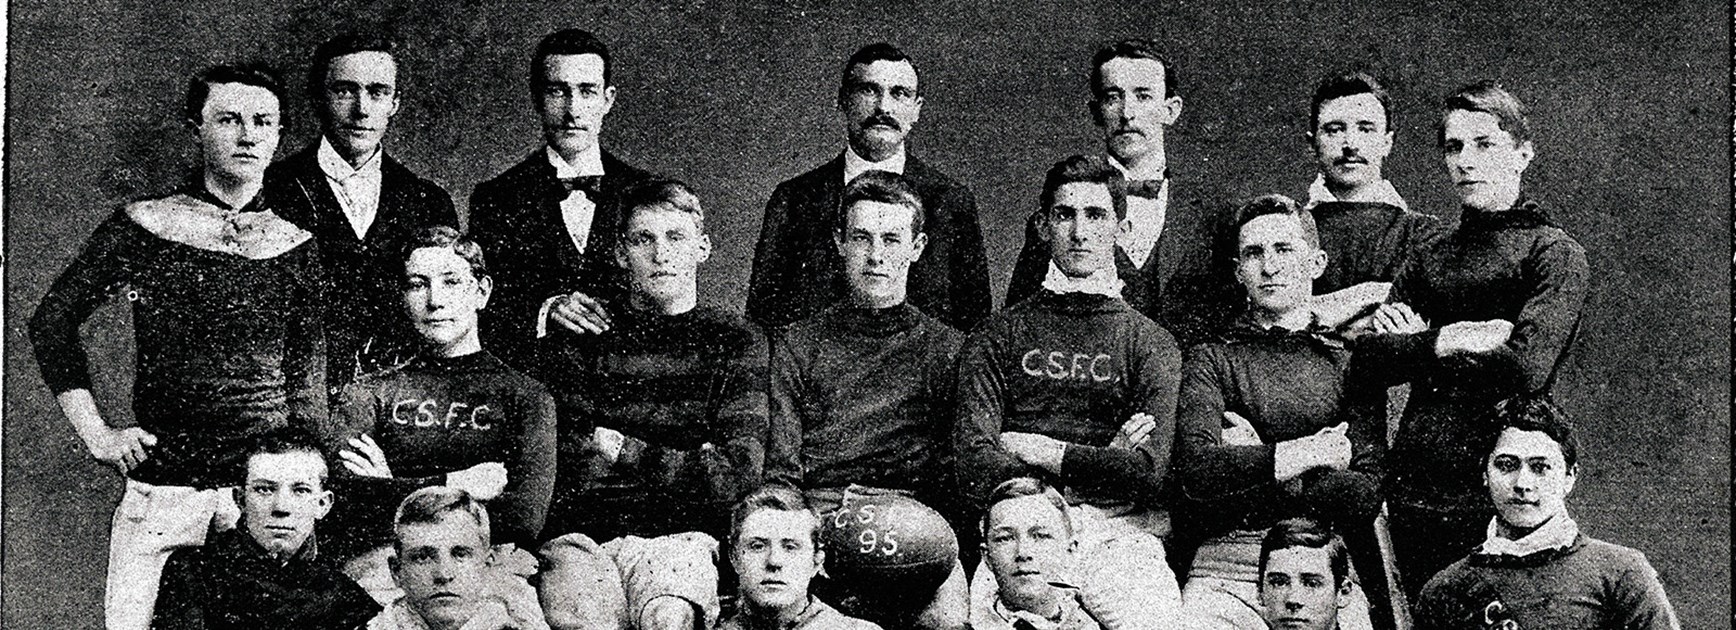 Victor Trumper played an important role in the introduction of rugby league to Australia.